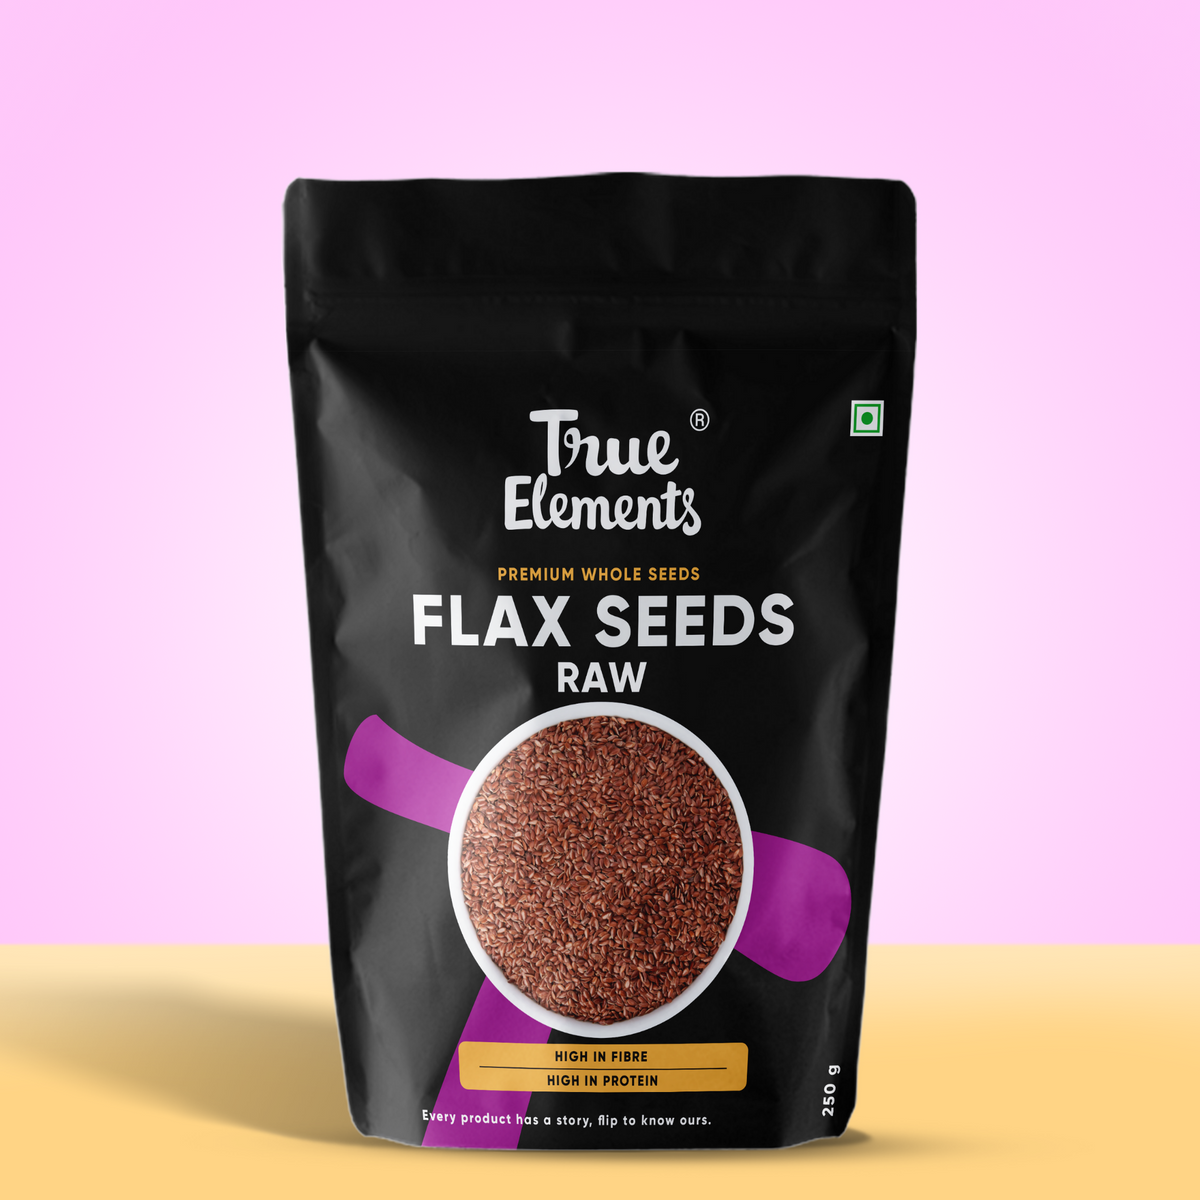 True elements raw flax seeds 250g Pouch (Premium Whole Seeds)